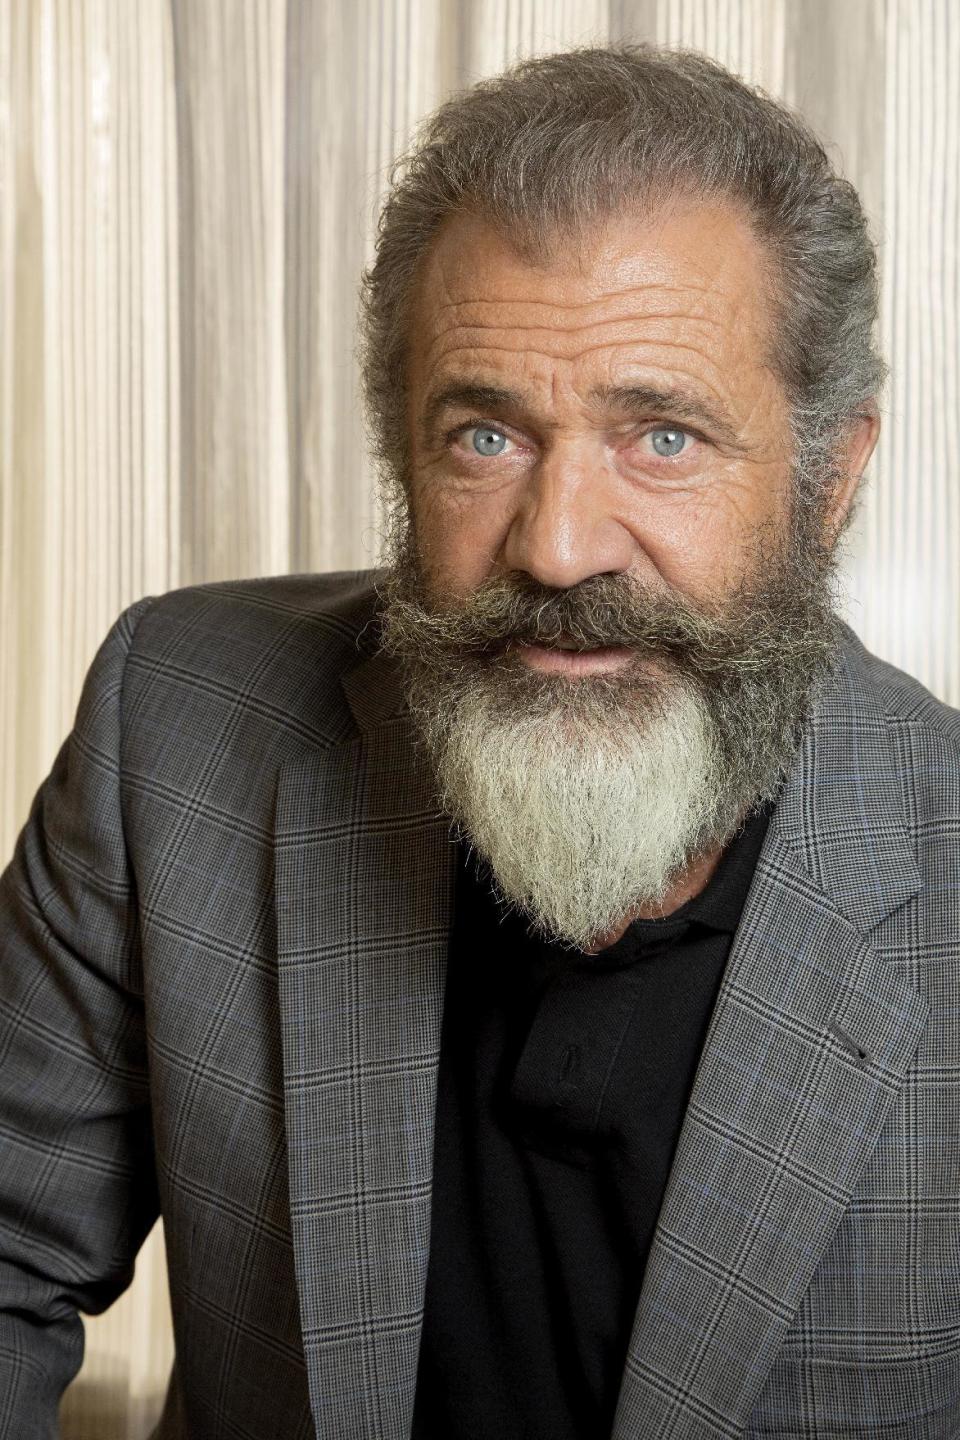 FILE - This Oct. 26, 2016 file photo shows director Mel Gibson posing to promote his film, "Hacksaw Ridge," at the Ritz Carlton in New Orleans. Gibson was nominated for an Oscar for best directing on Tuesday, Jan. 24, 2017, for his work on the film. The 89th Academy Awards will take place on Feb. 26. (AP Photo/Max Becherer, File)